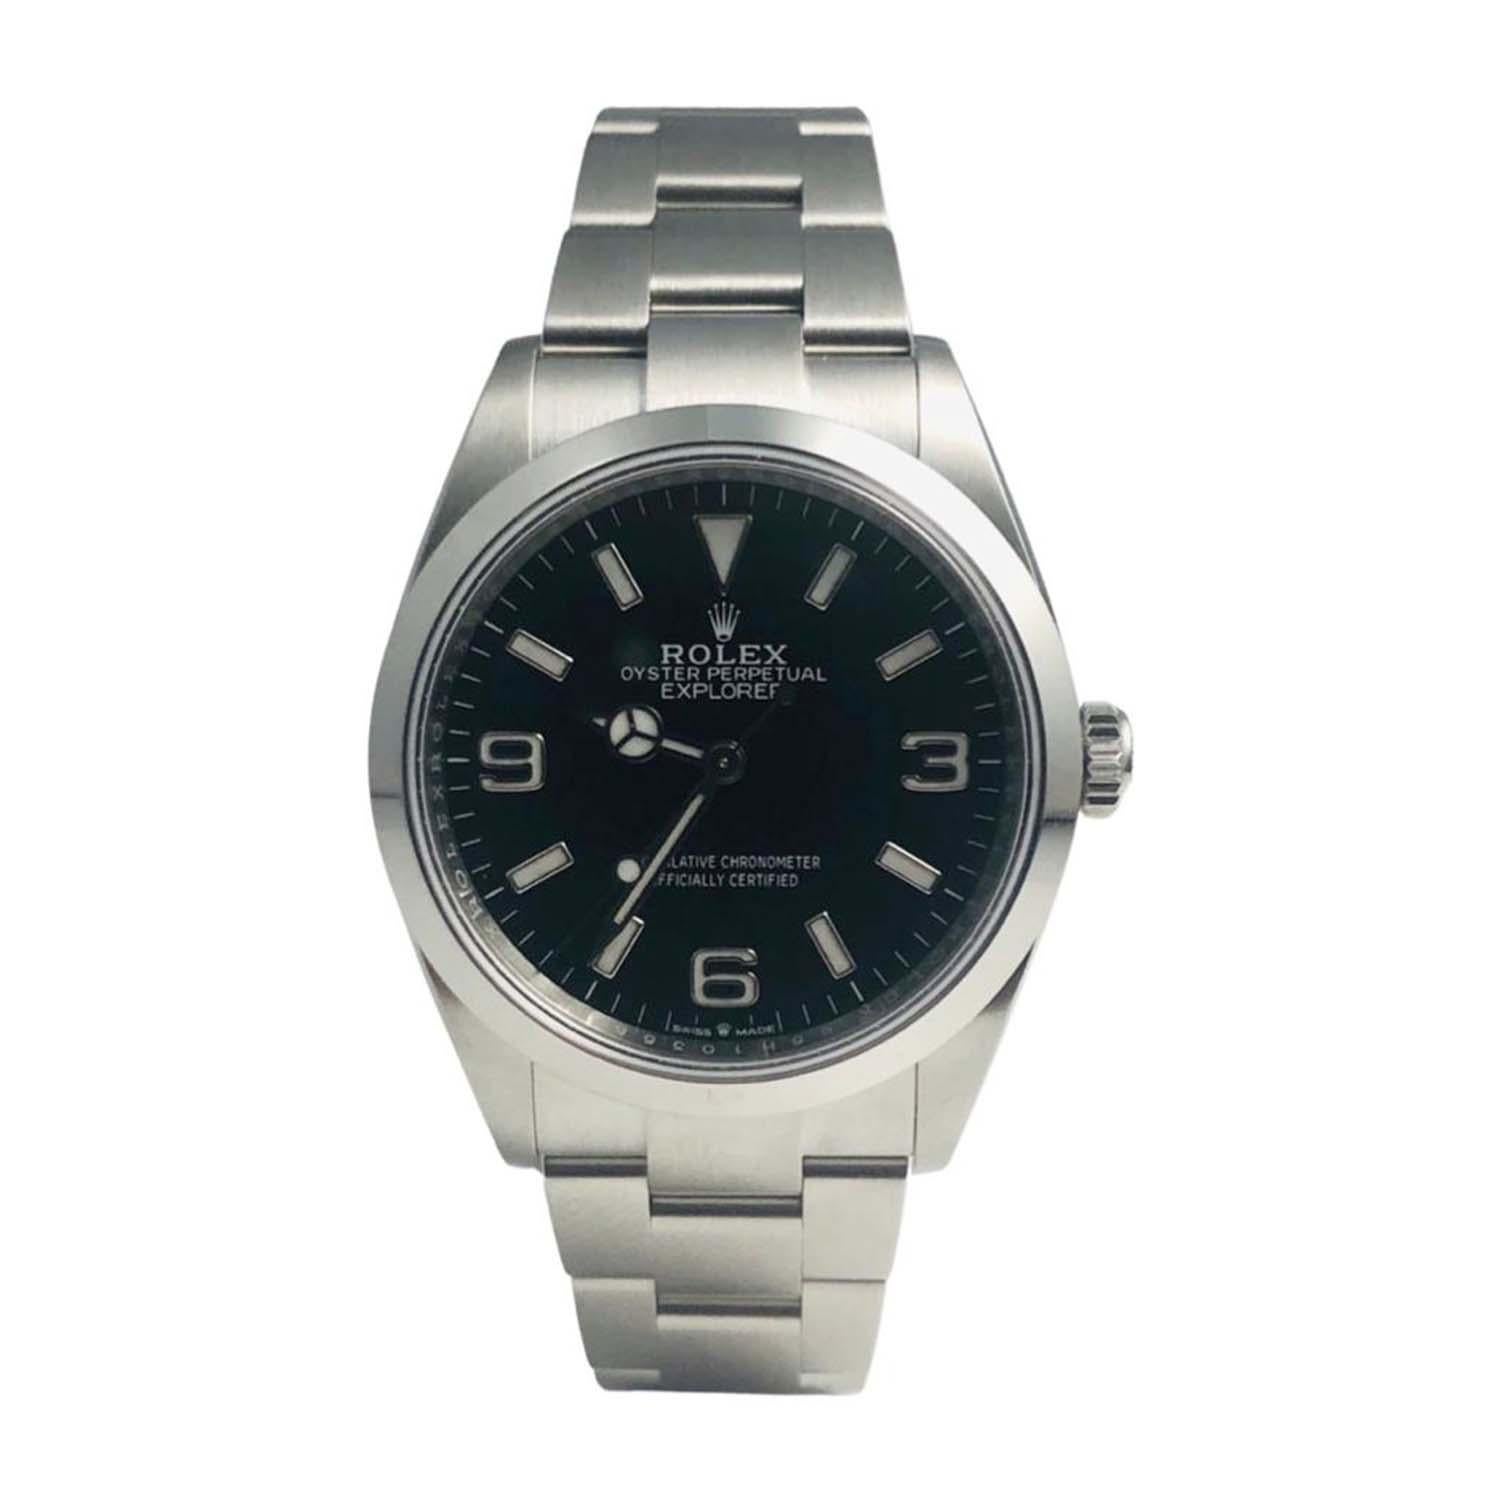 Brand: Rolex

Model Name: Explorer

Model Number: 124270

Movement: Automatic

Case Size: 36  mm

Case Back: Closed

Case Material:  Stainless Steel

Bezel: Smooth

Total Item Weight(grams):

Dial: Black

Bracelet: Stainless Steel

Hour Markers: